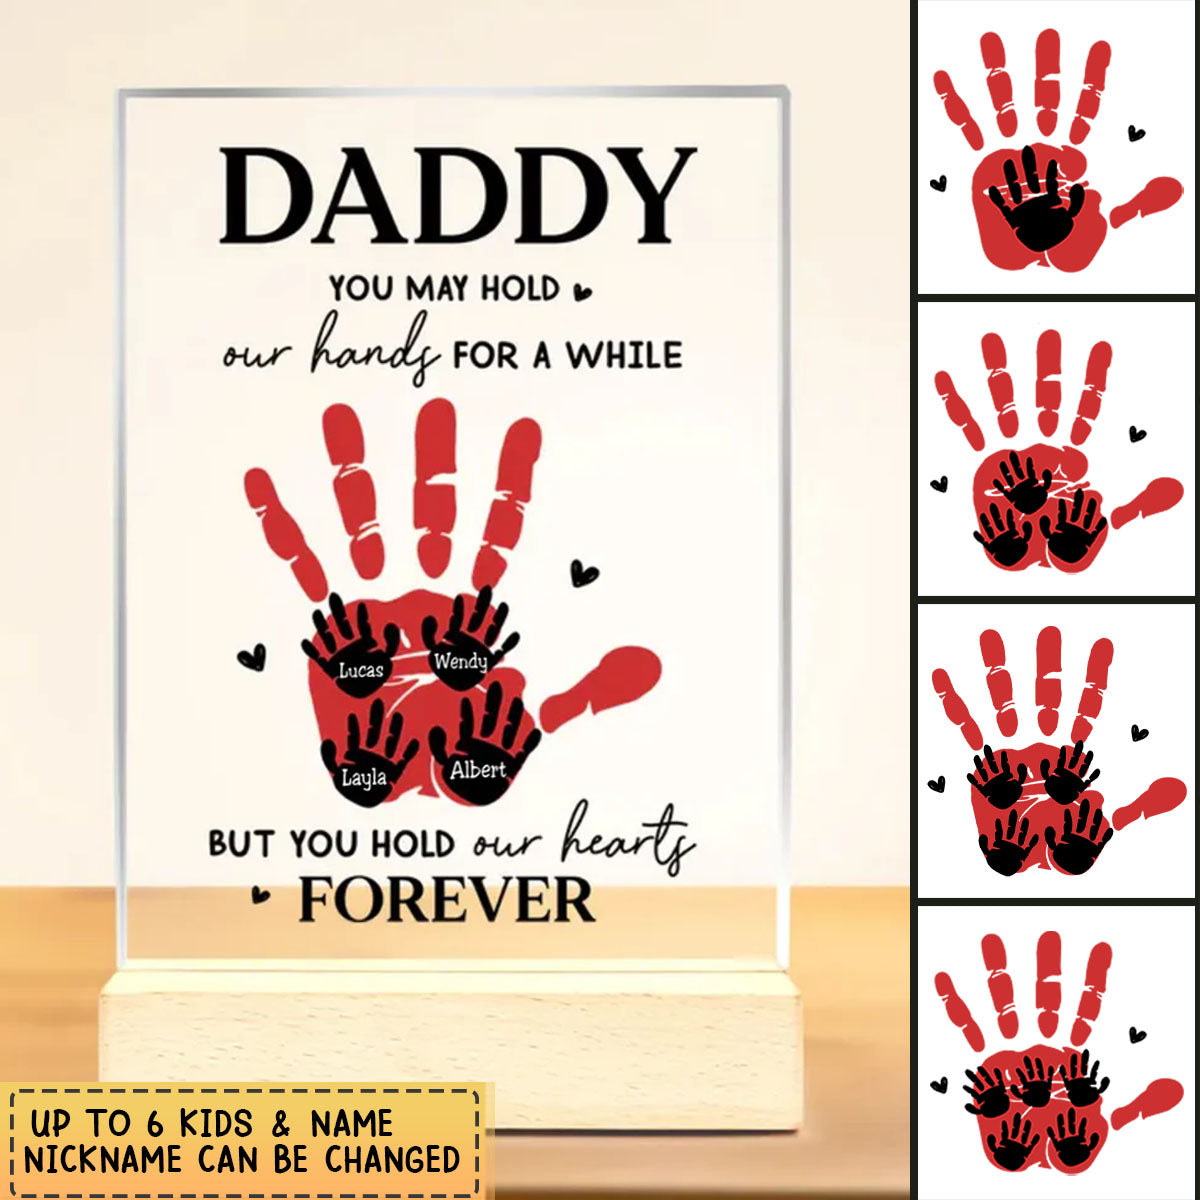 Personalized Daddy You May Hold Our hands For A While But You Hold Our Hearts Forever Acrylic Plaque